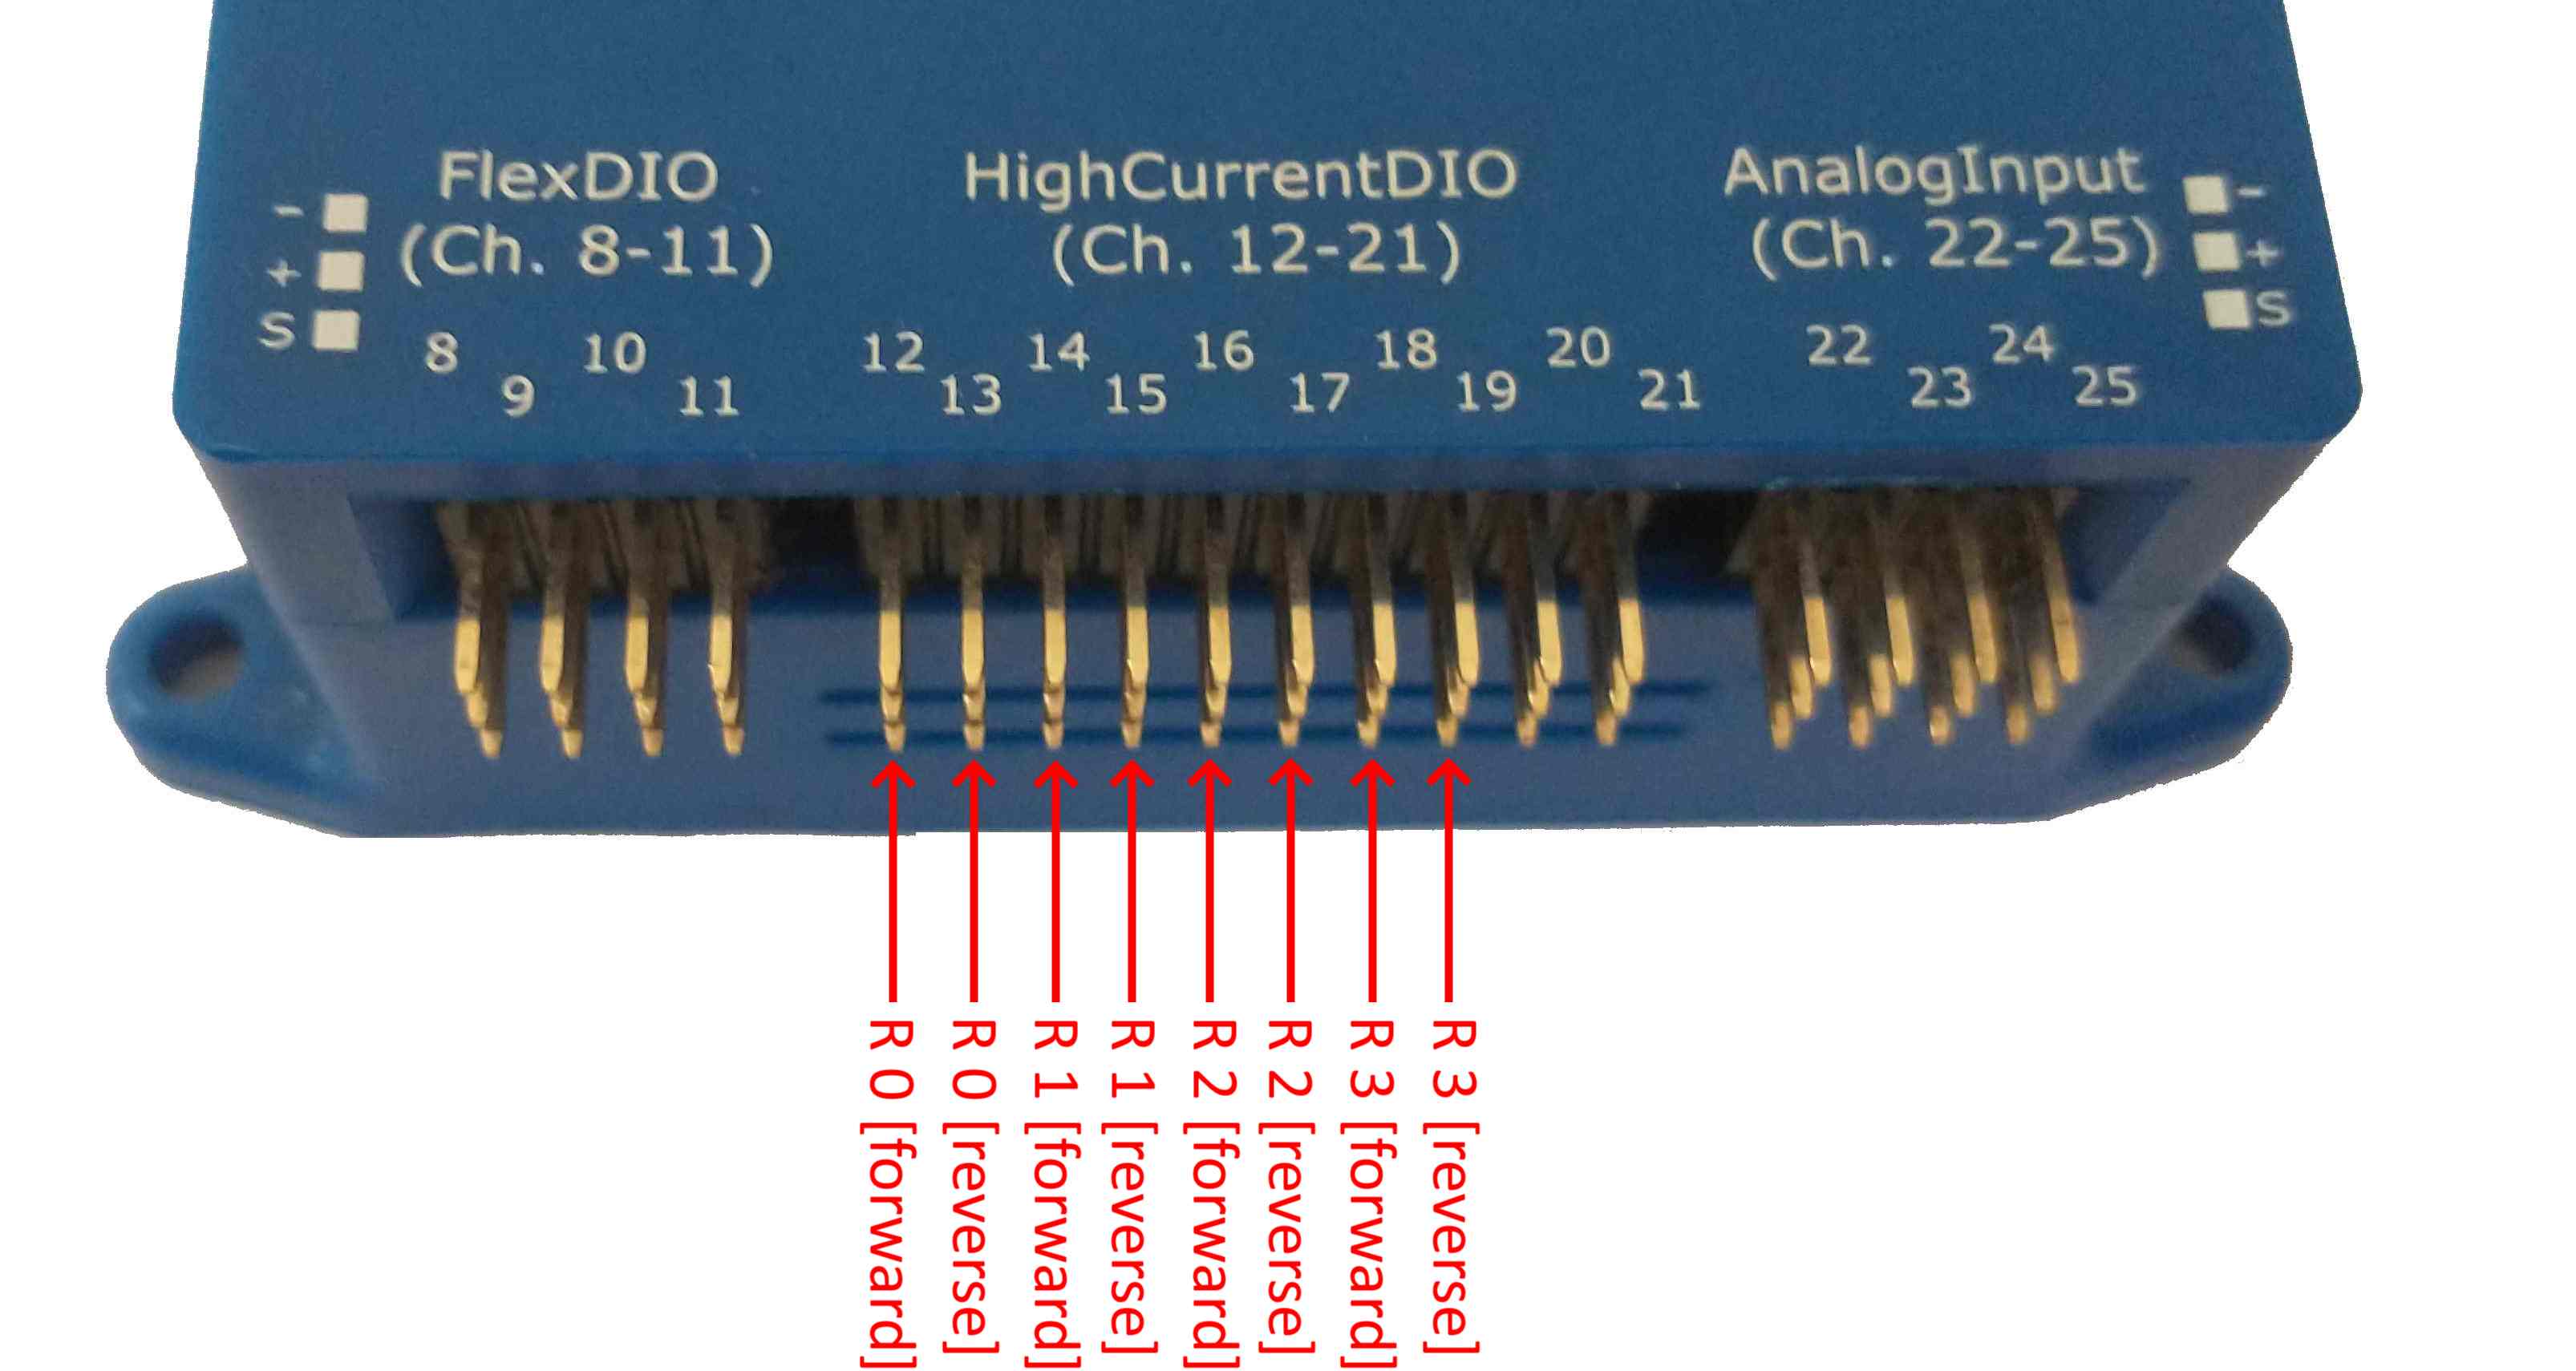 ../../_images/FlexDIO_HCDIO_And_AnalogIn_Headers_Trimmed_WPIChannels_Relays.jpg